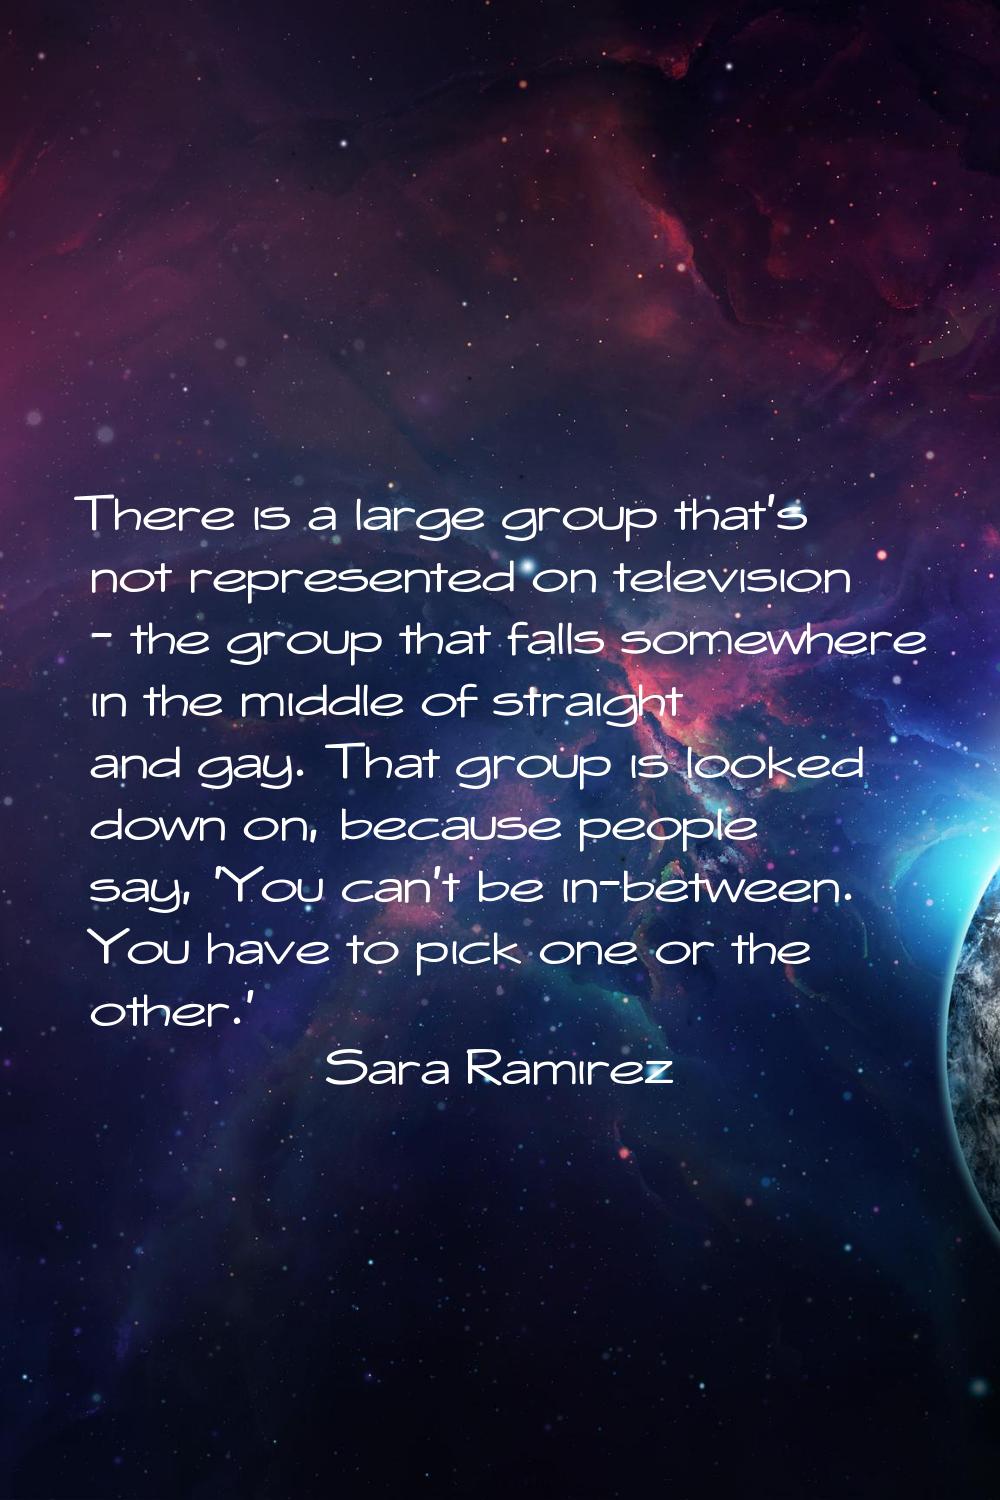 There is a large group that's not represented on television - the group that falls somewhere in the